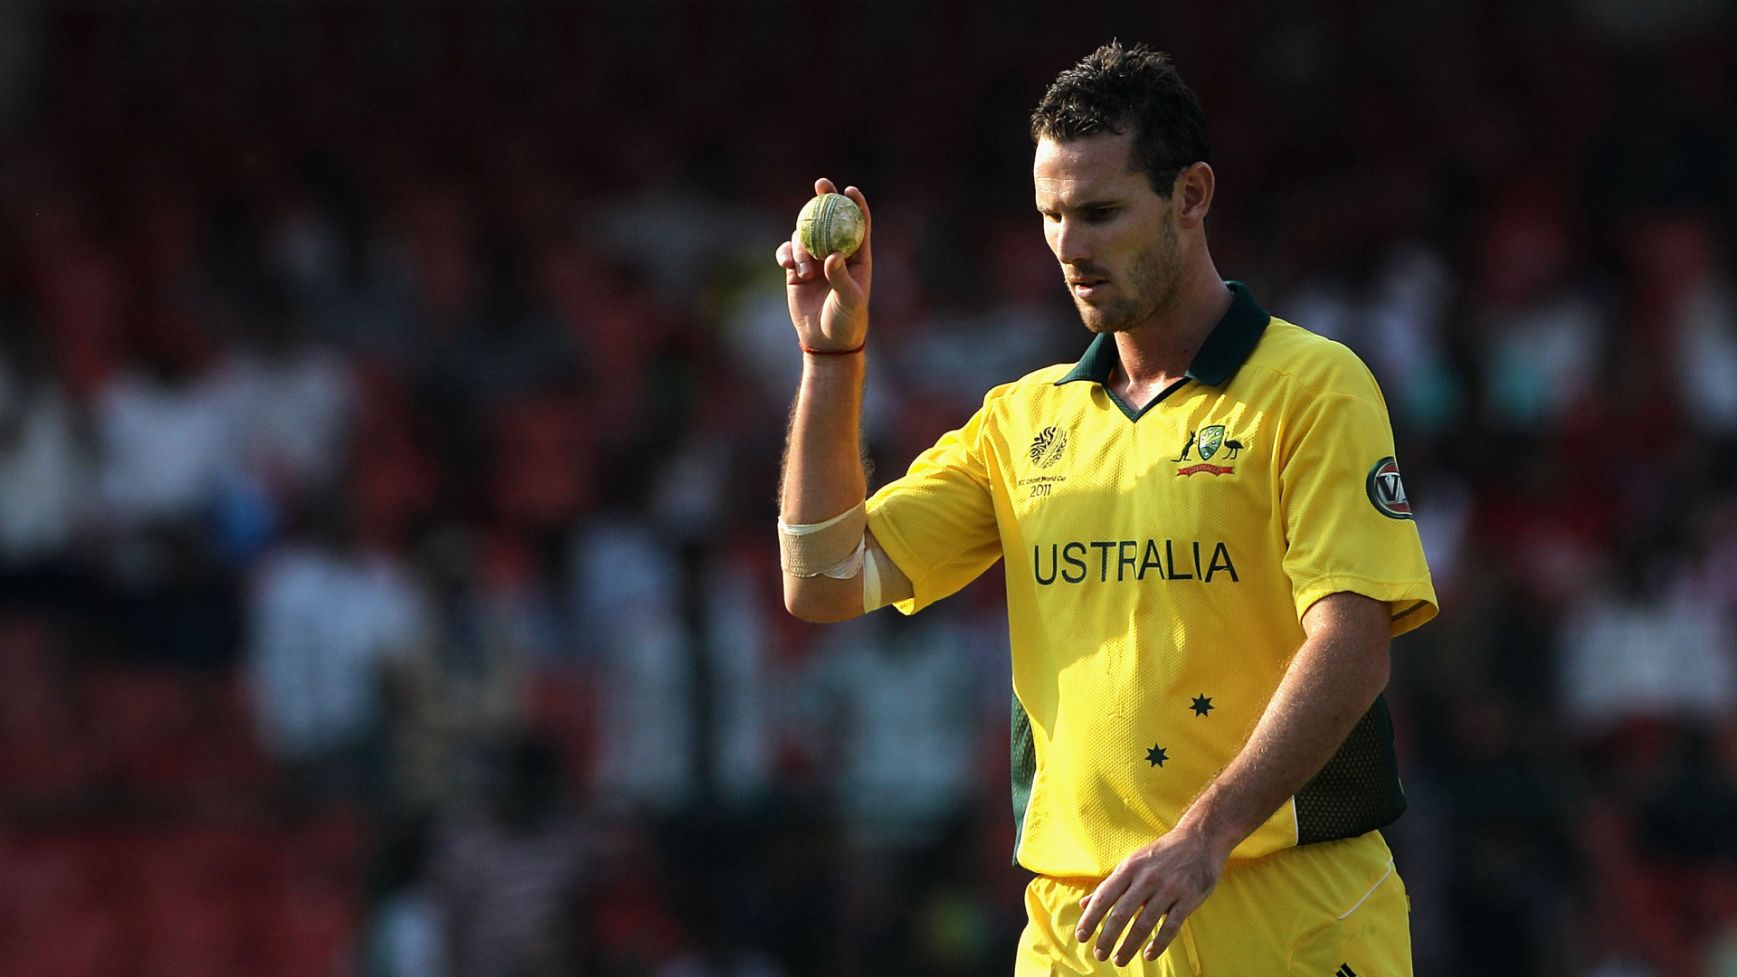 Australia’s Shaun Tait presents his candidature for Bangladesh’s fast bowling coach